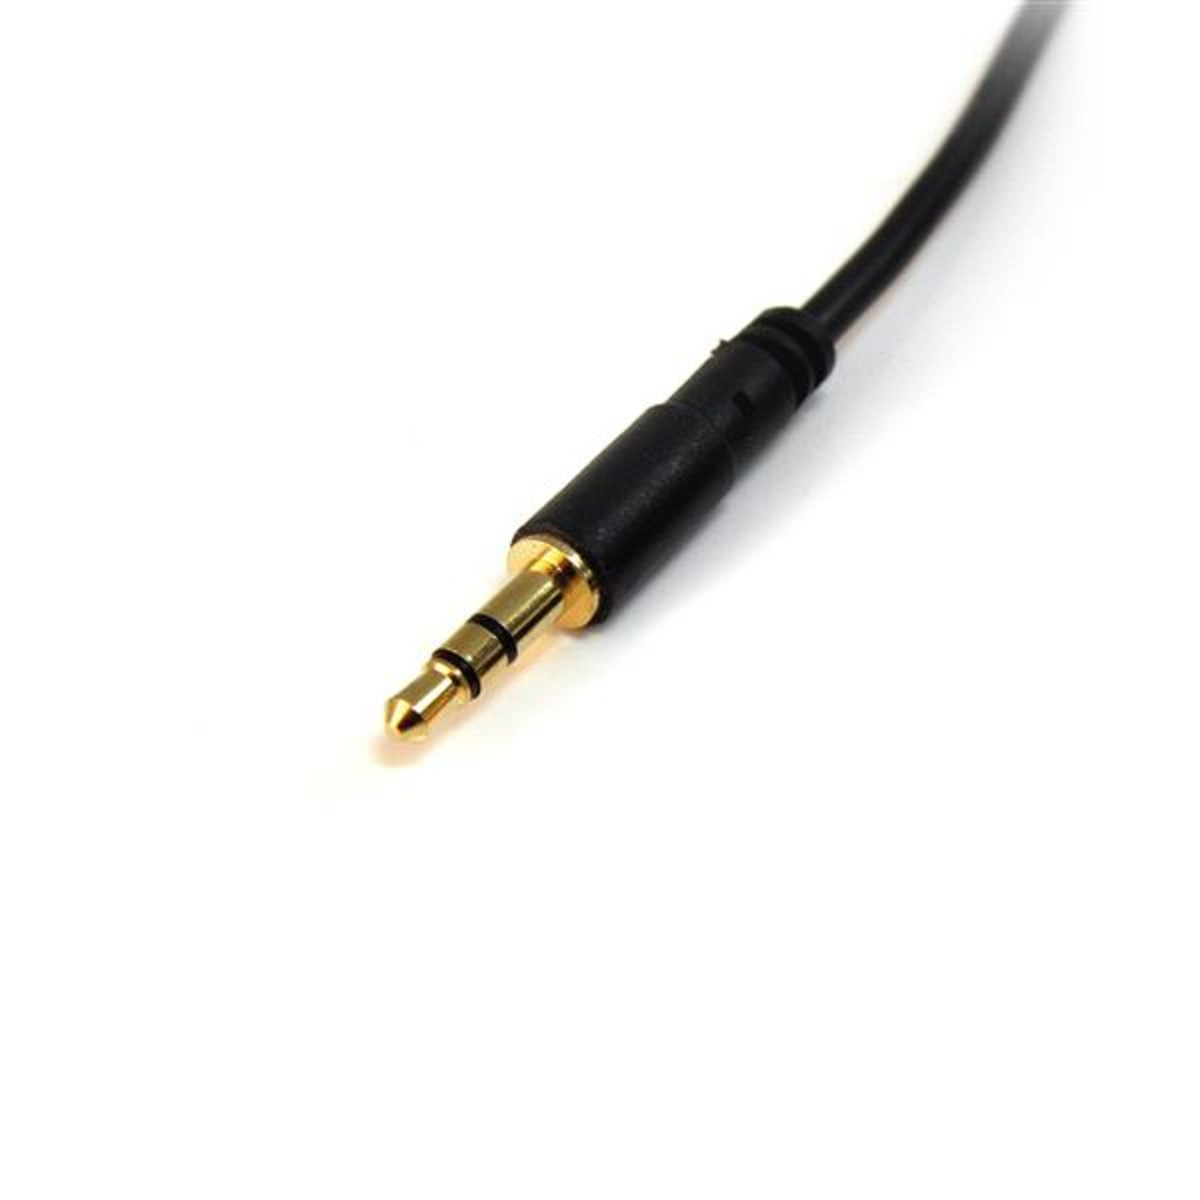 15 ft Slim 3.5mm Stereo Audio Cable